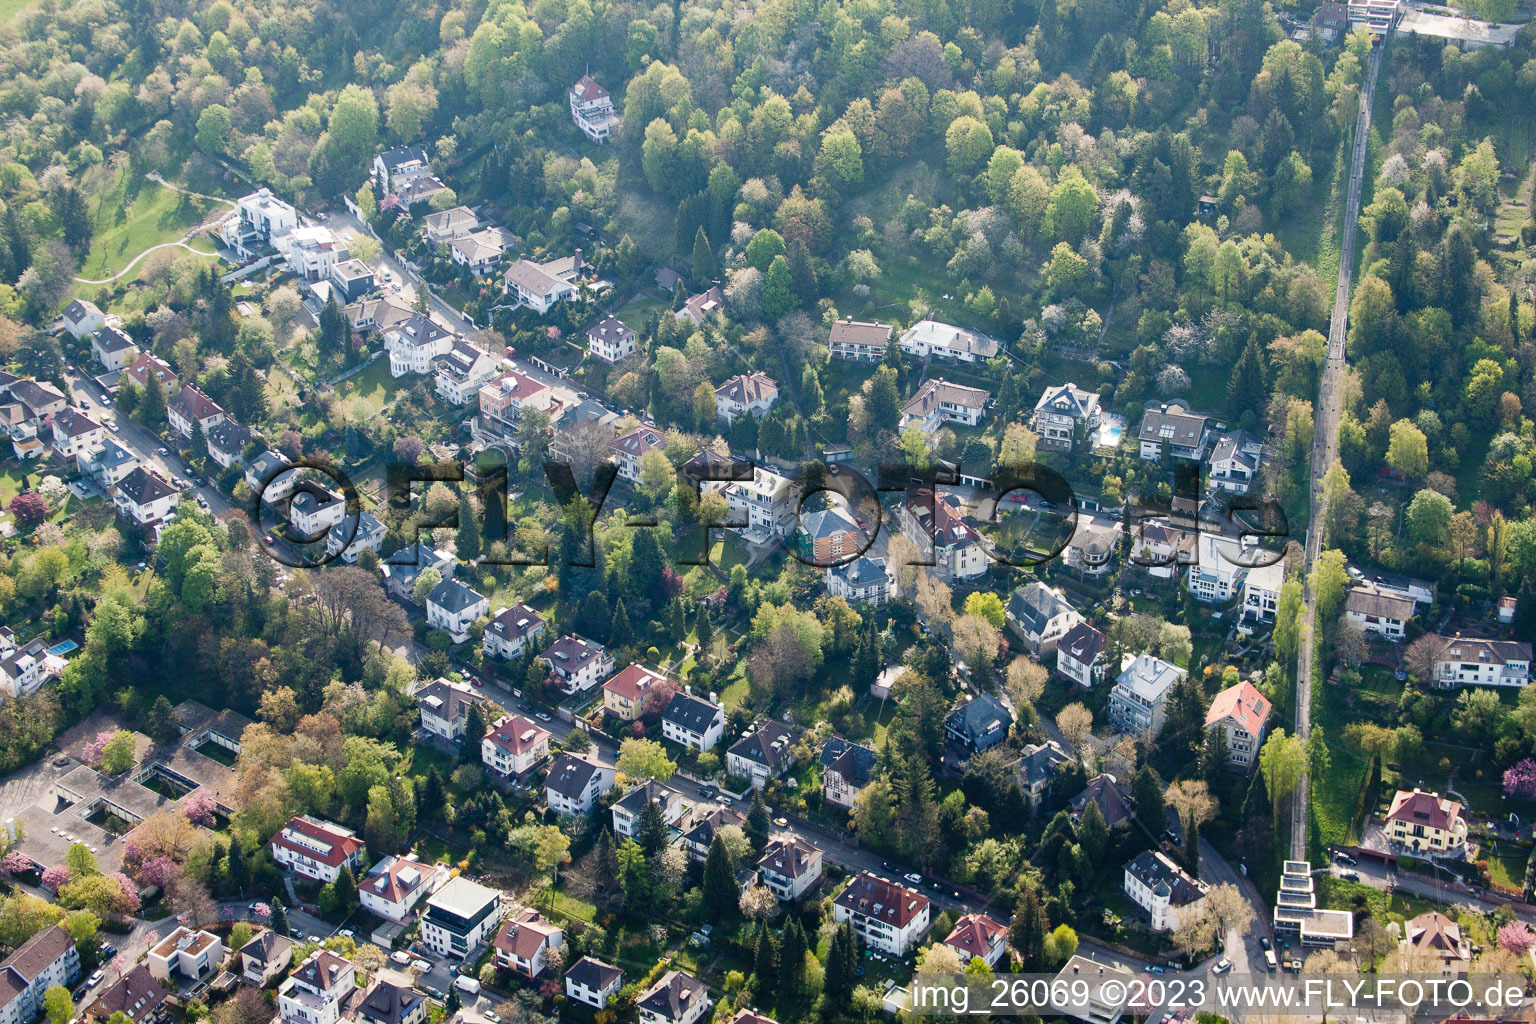 Aerial view of Turmberg mountain railway in the district Durlach in Karlsruhe in the state Baden-Wuerttemberg, Germany